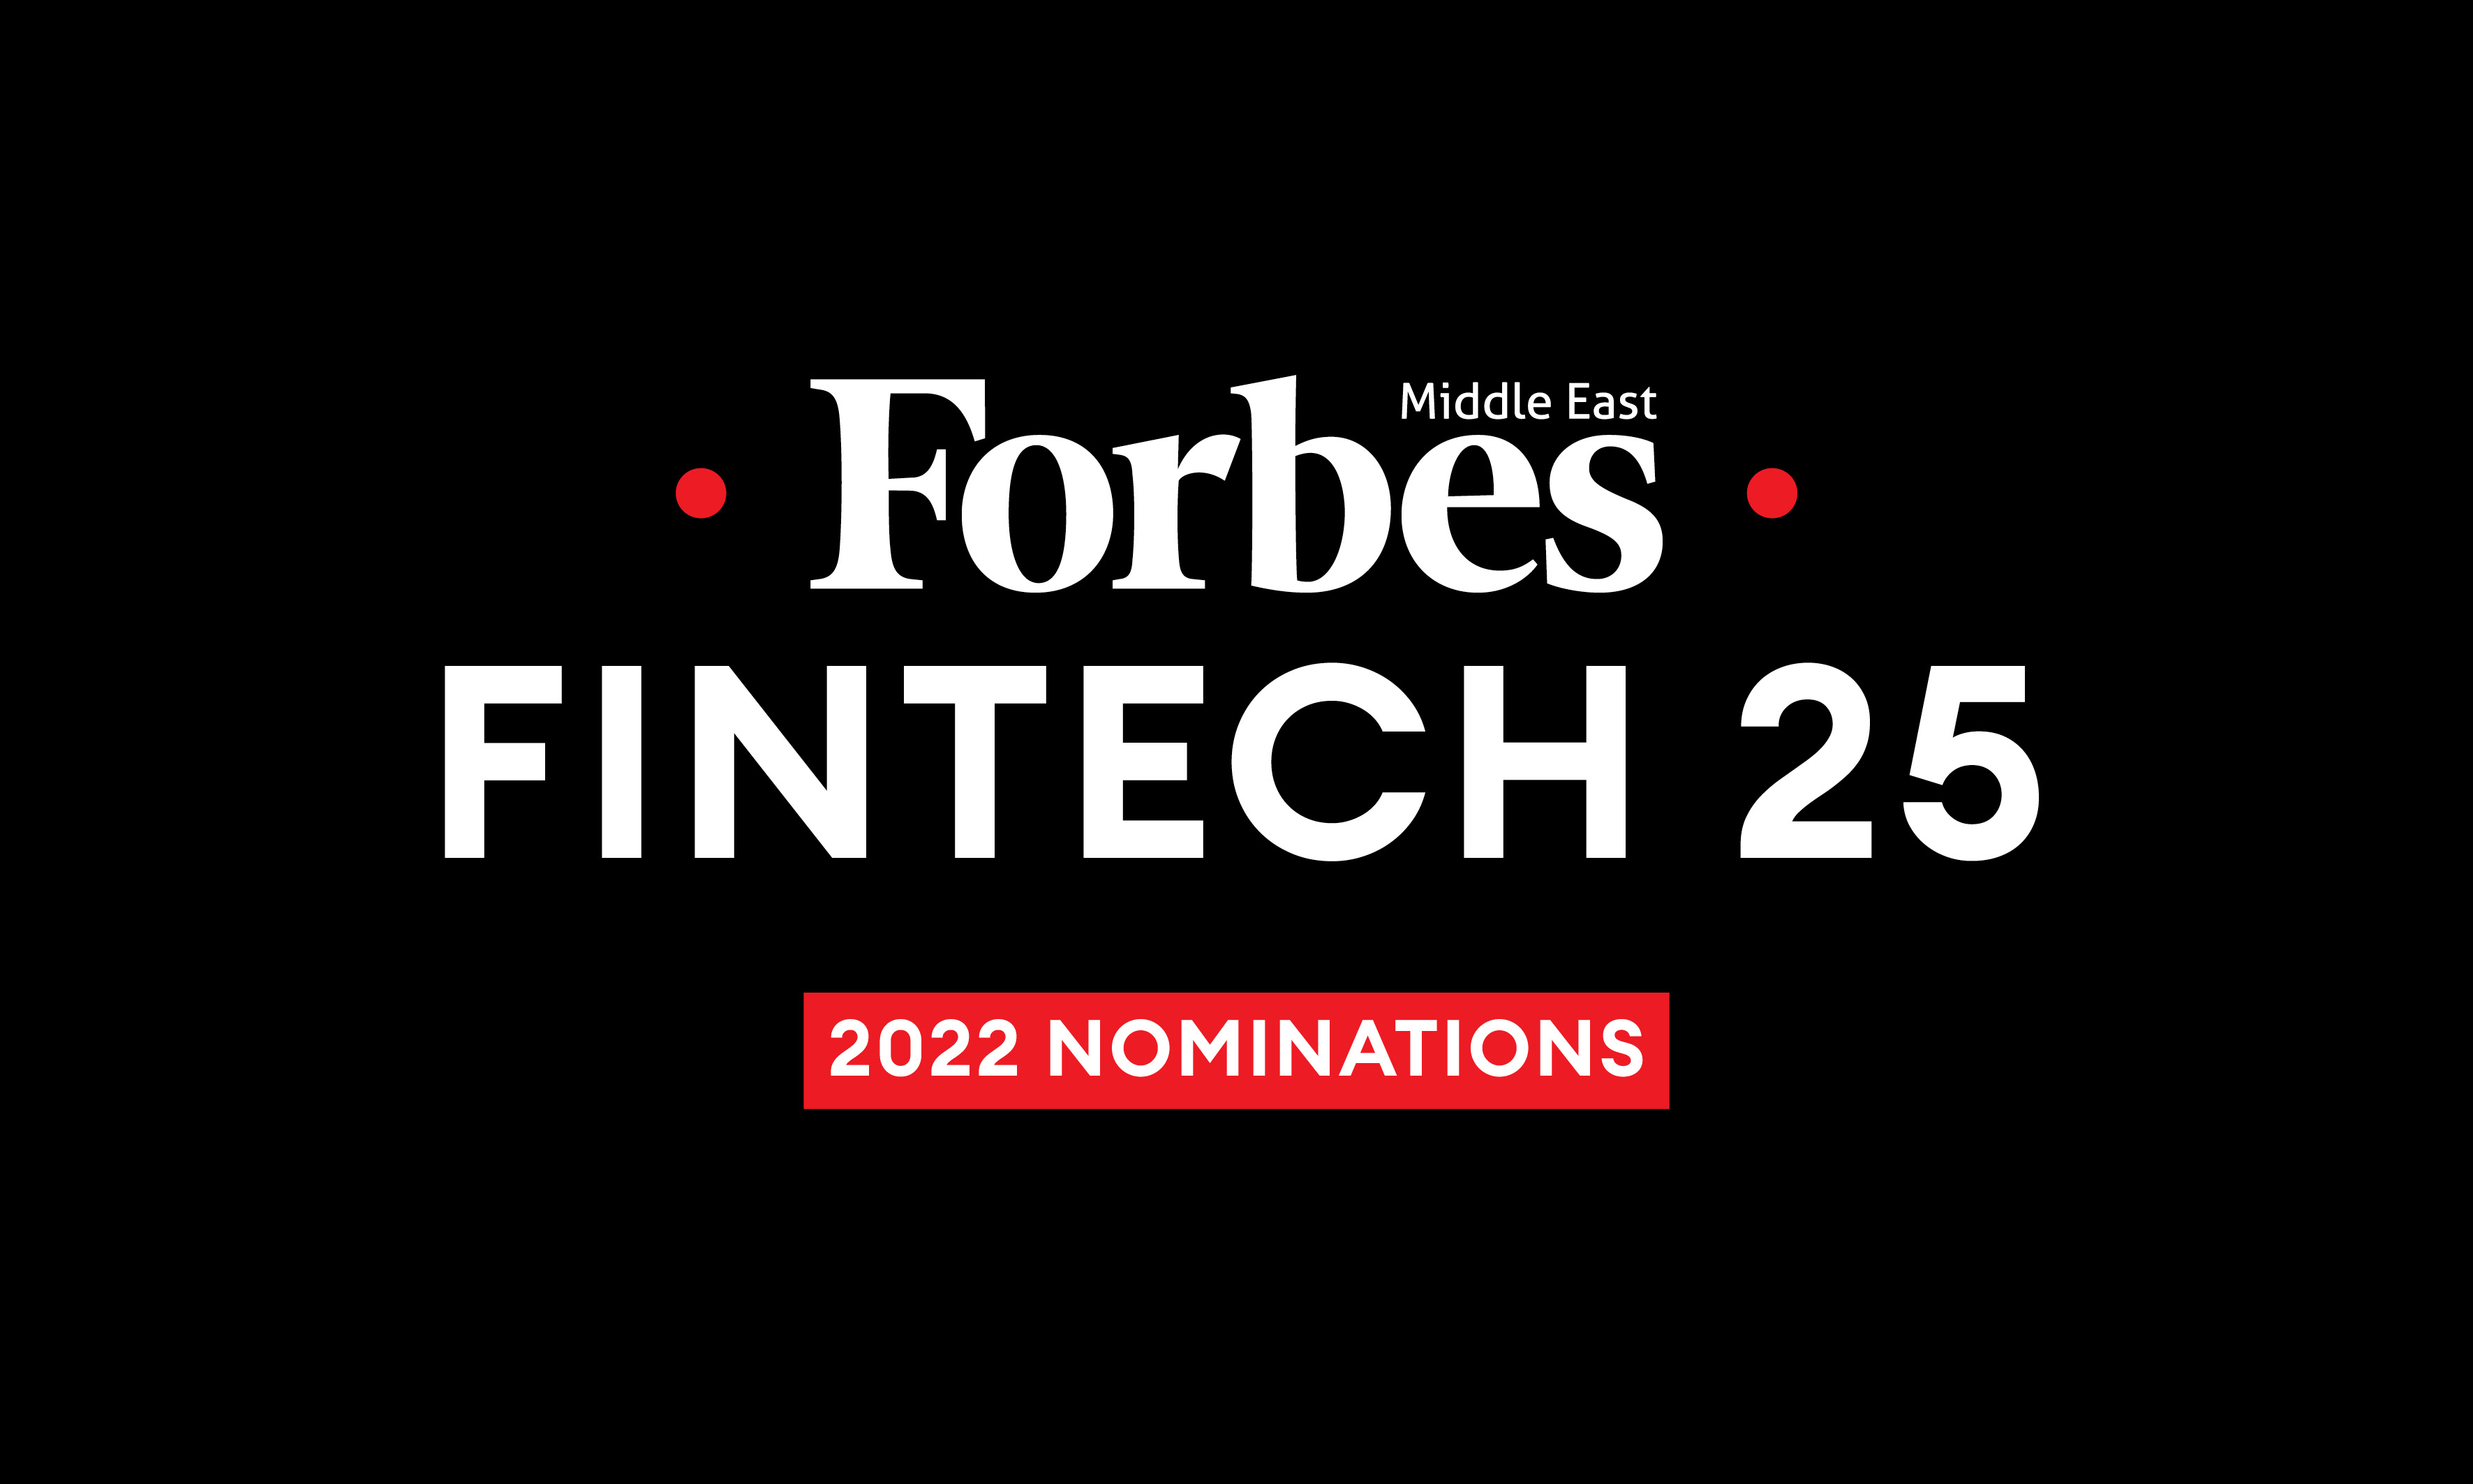 Top Fintech Companies In The Middle East 2022